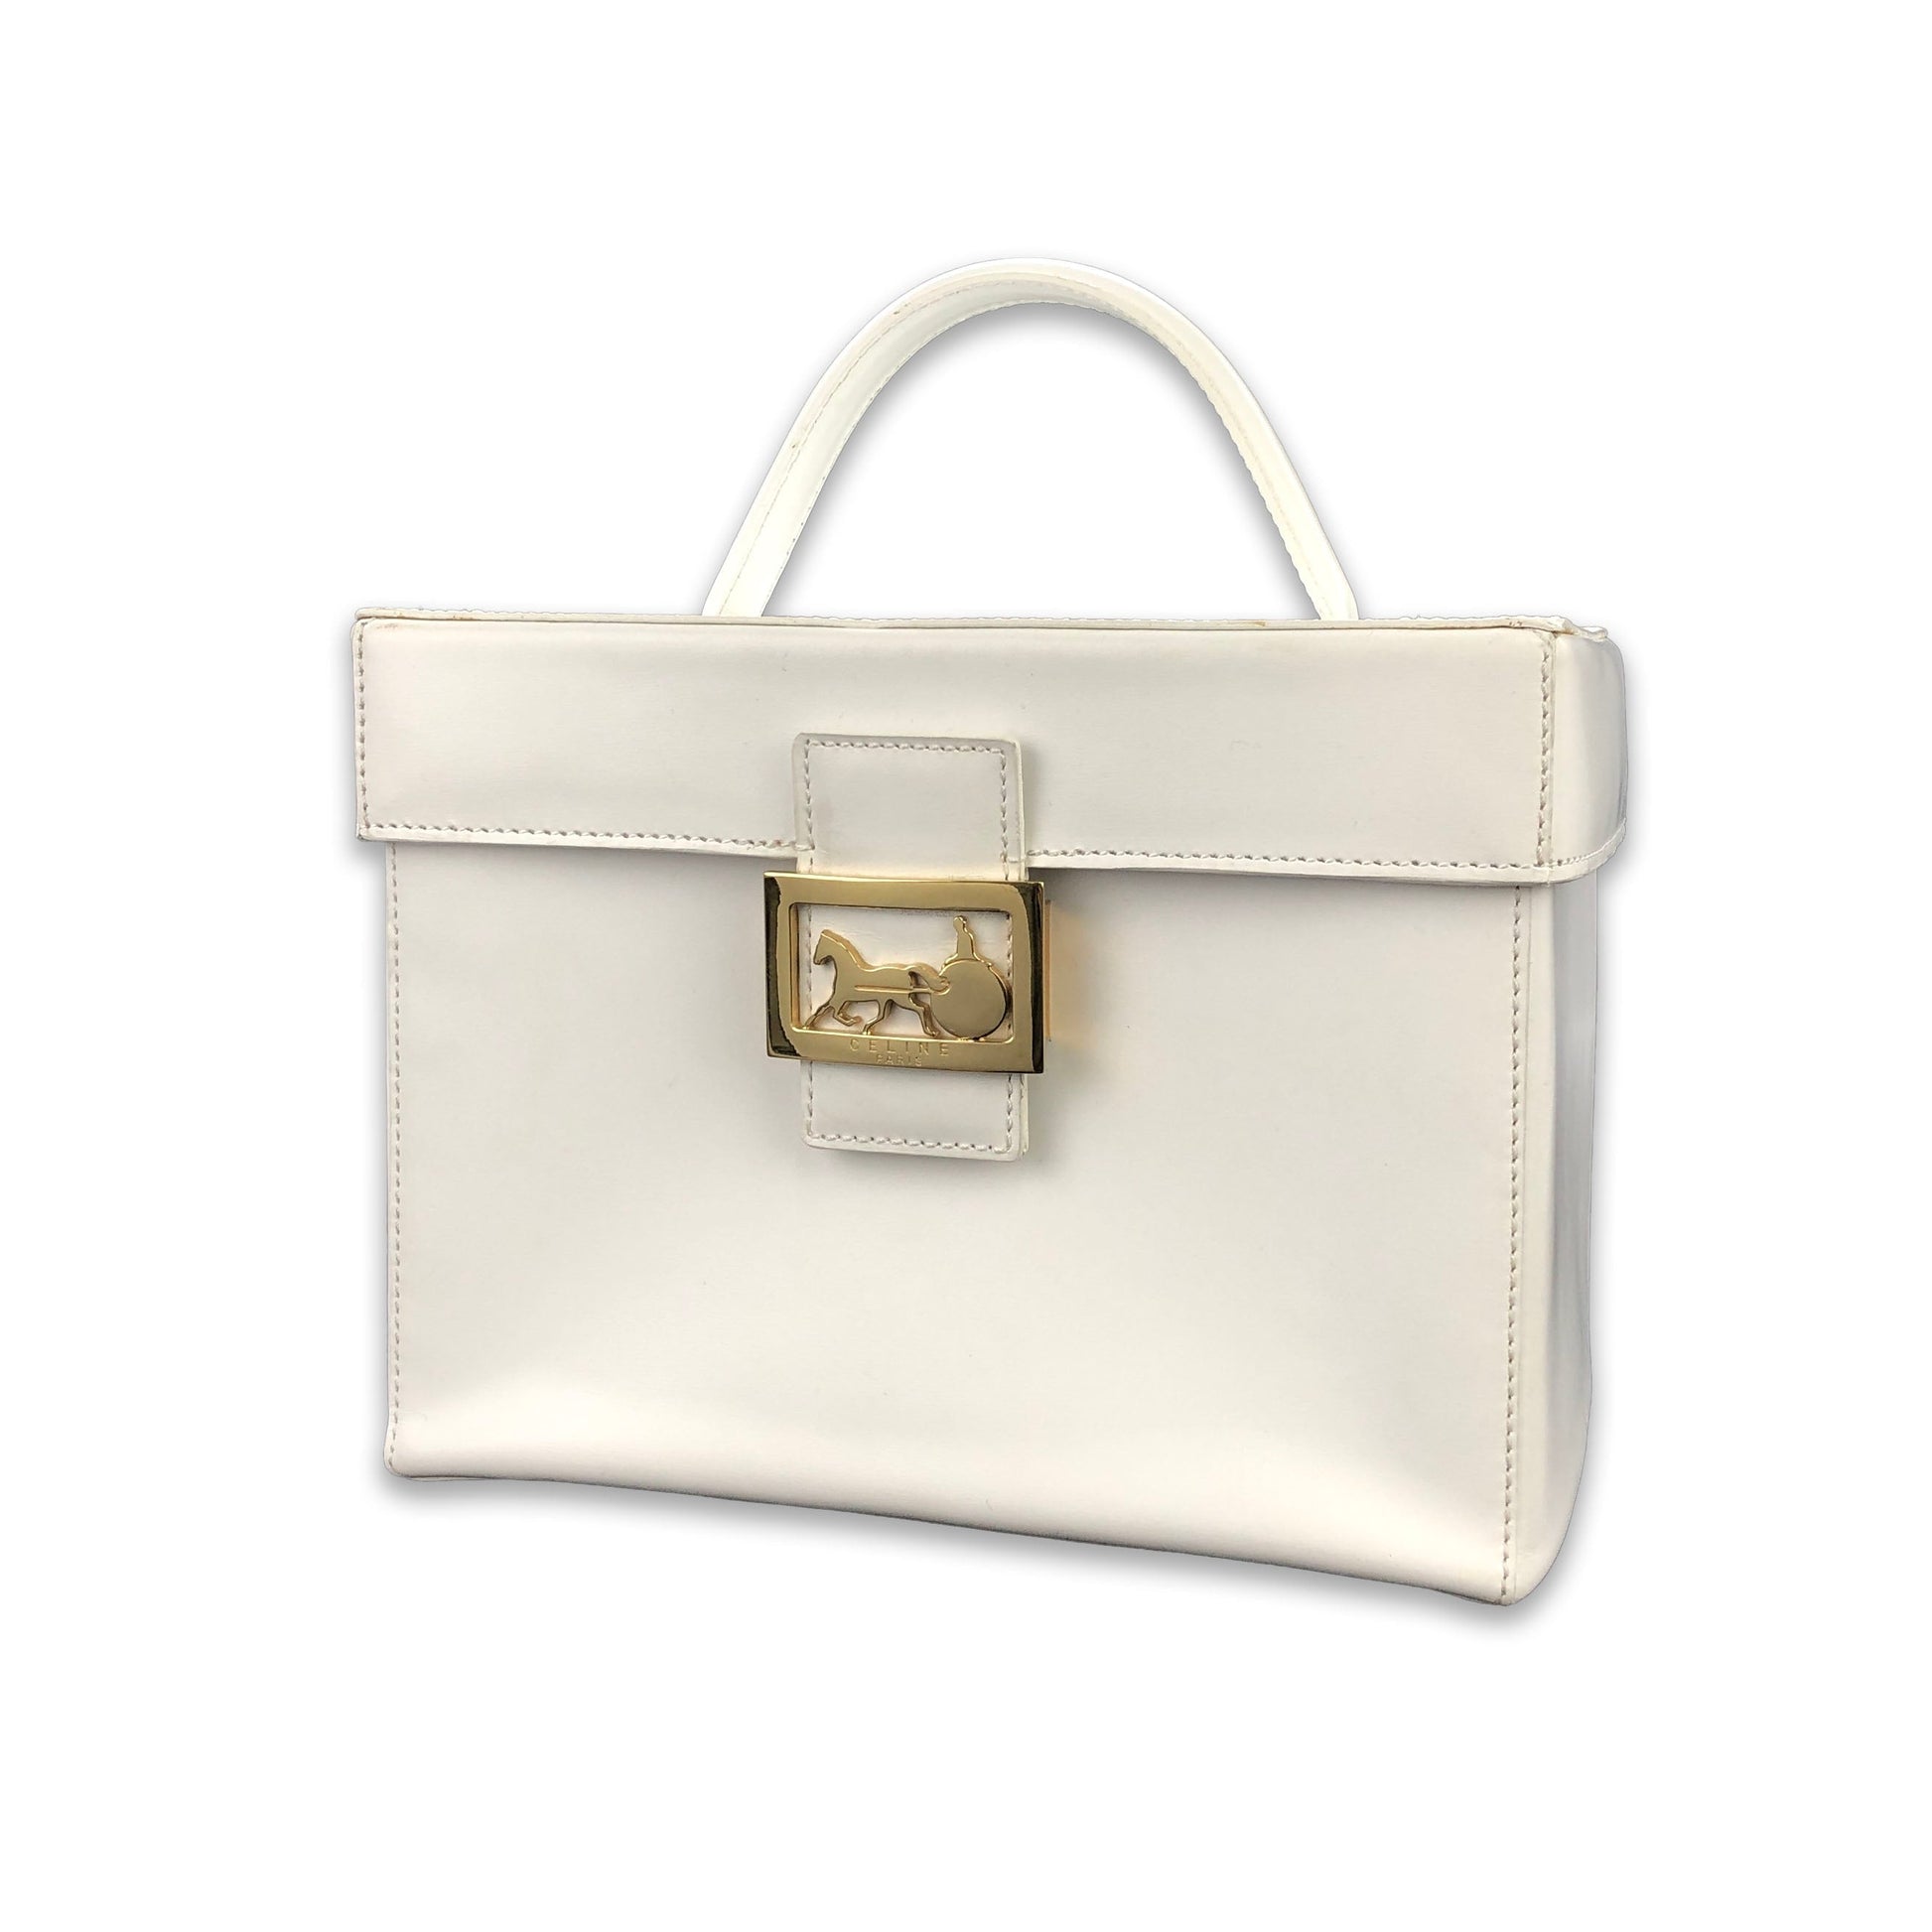 Celine Vintage Creamy White Patent Leather Gold Carriage Logo Flap